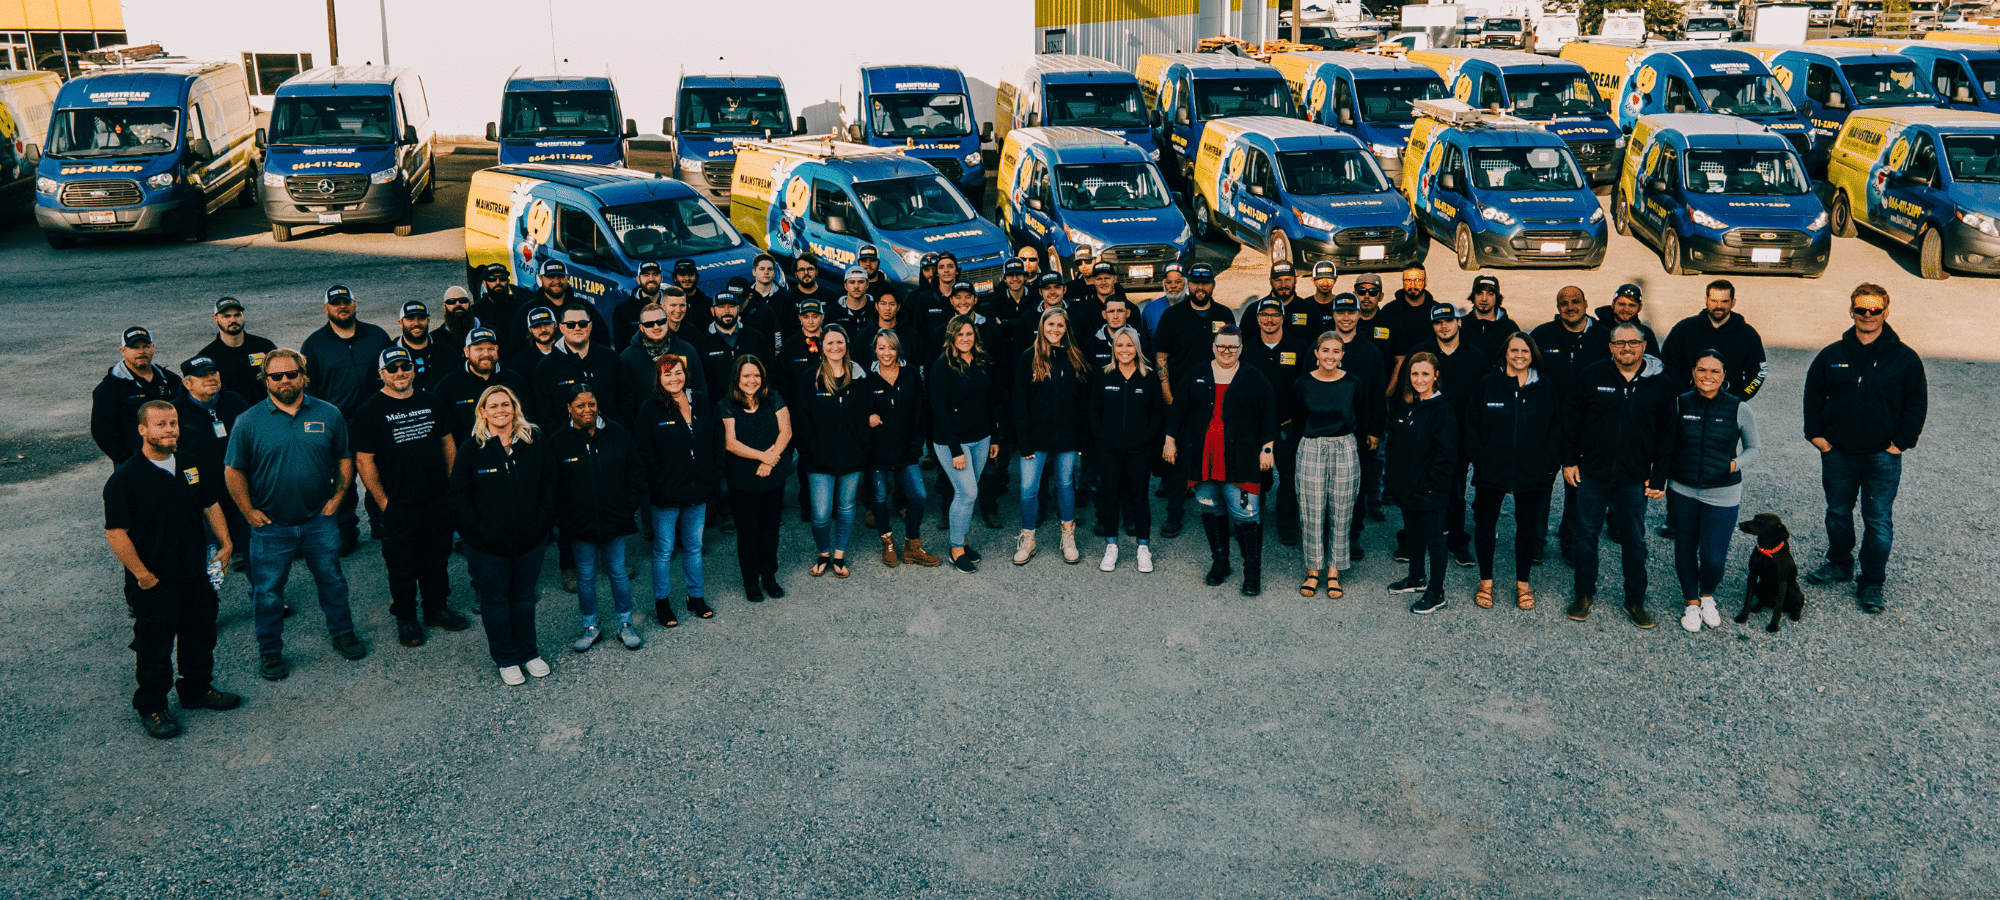 The Mainstream team at our headquarters in Spokane, WA